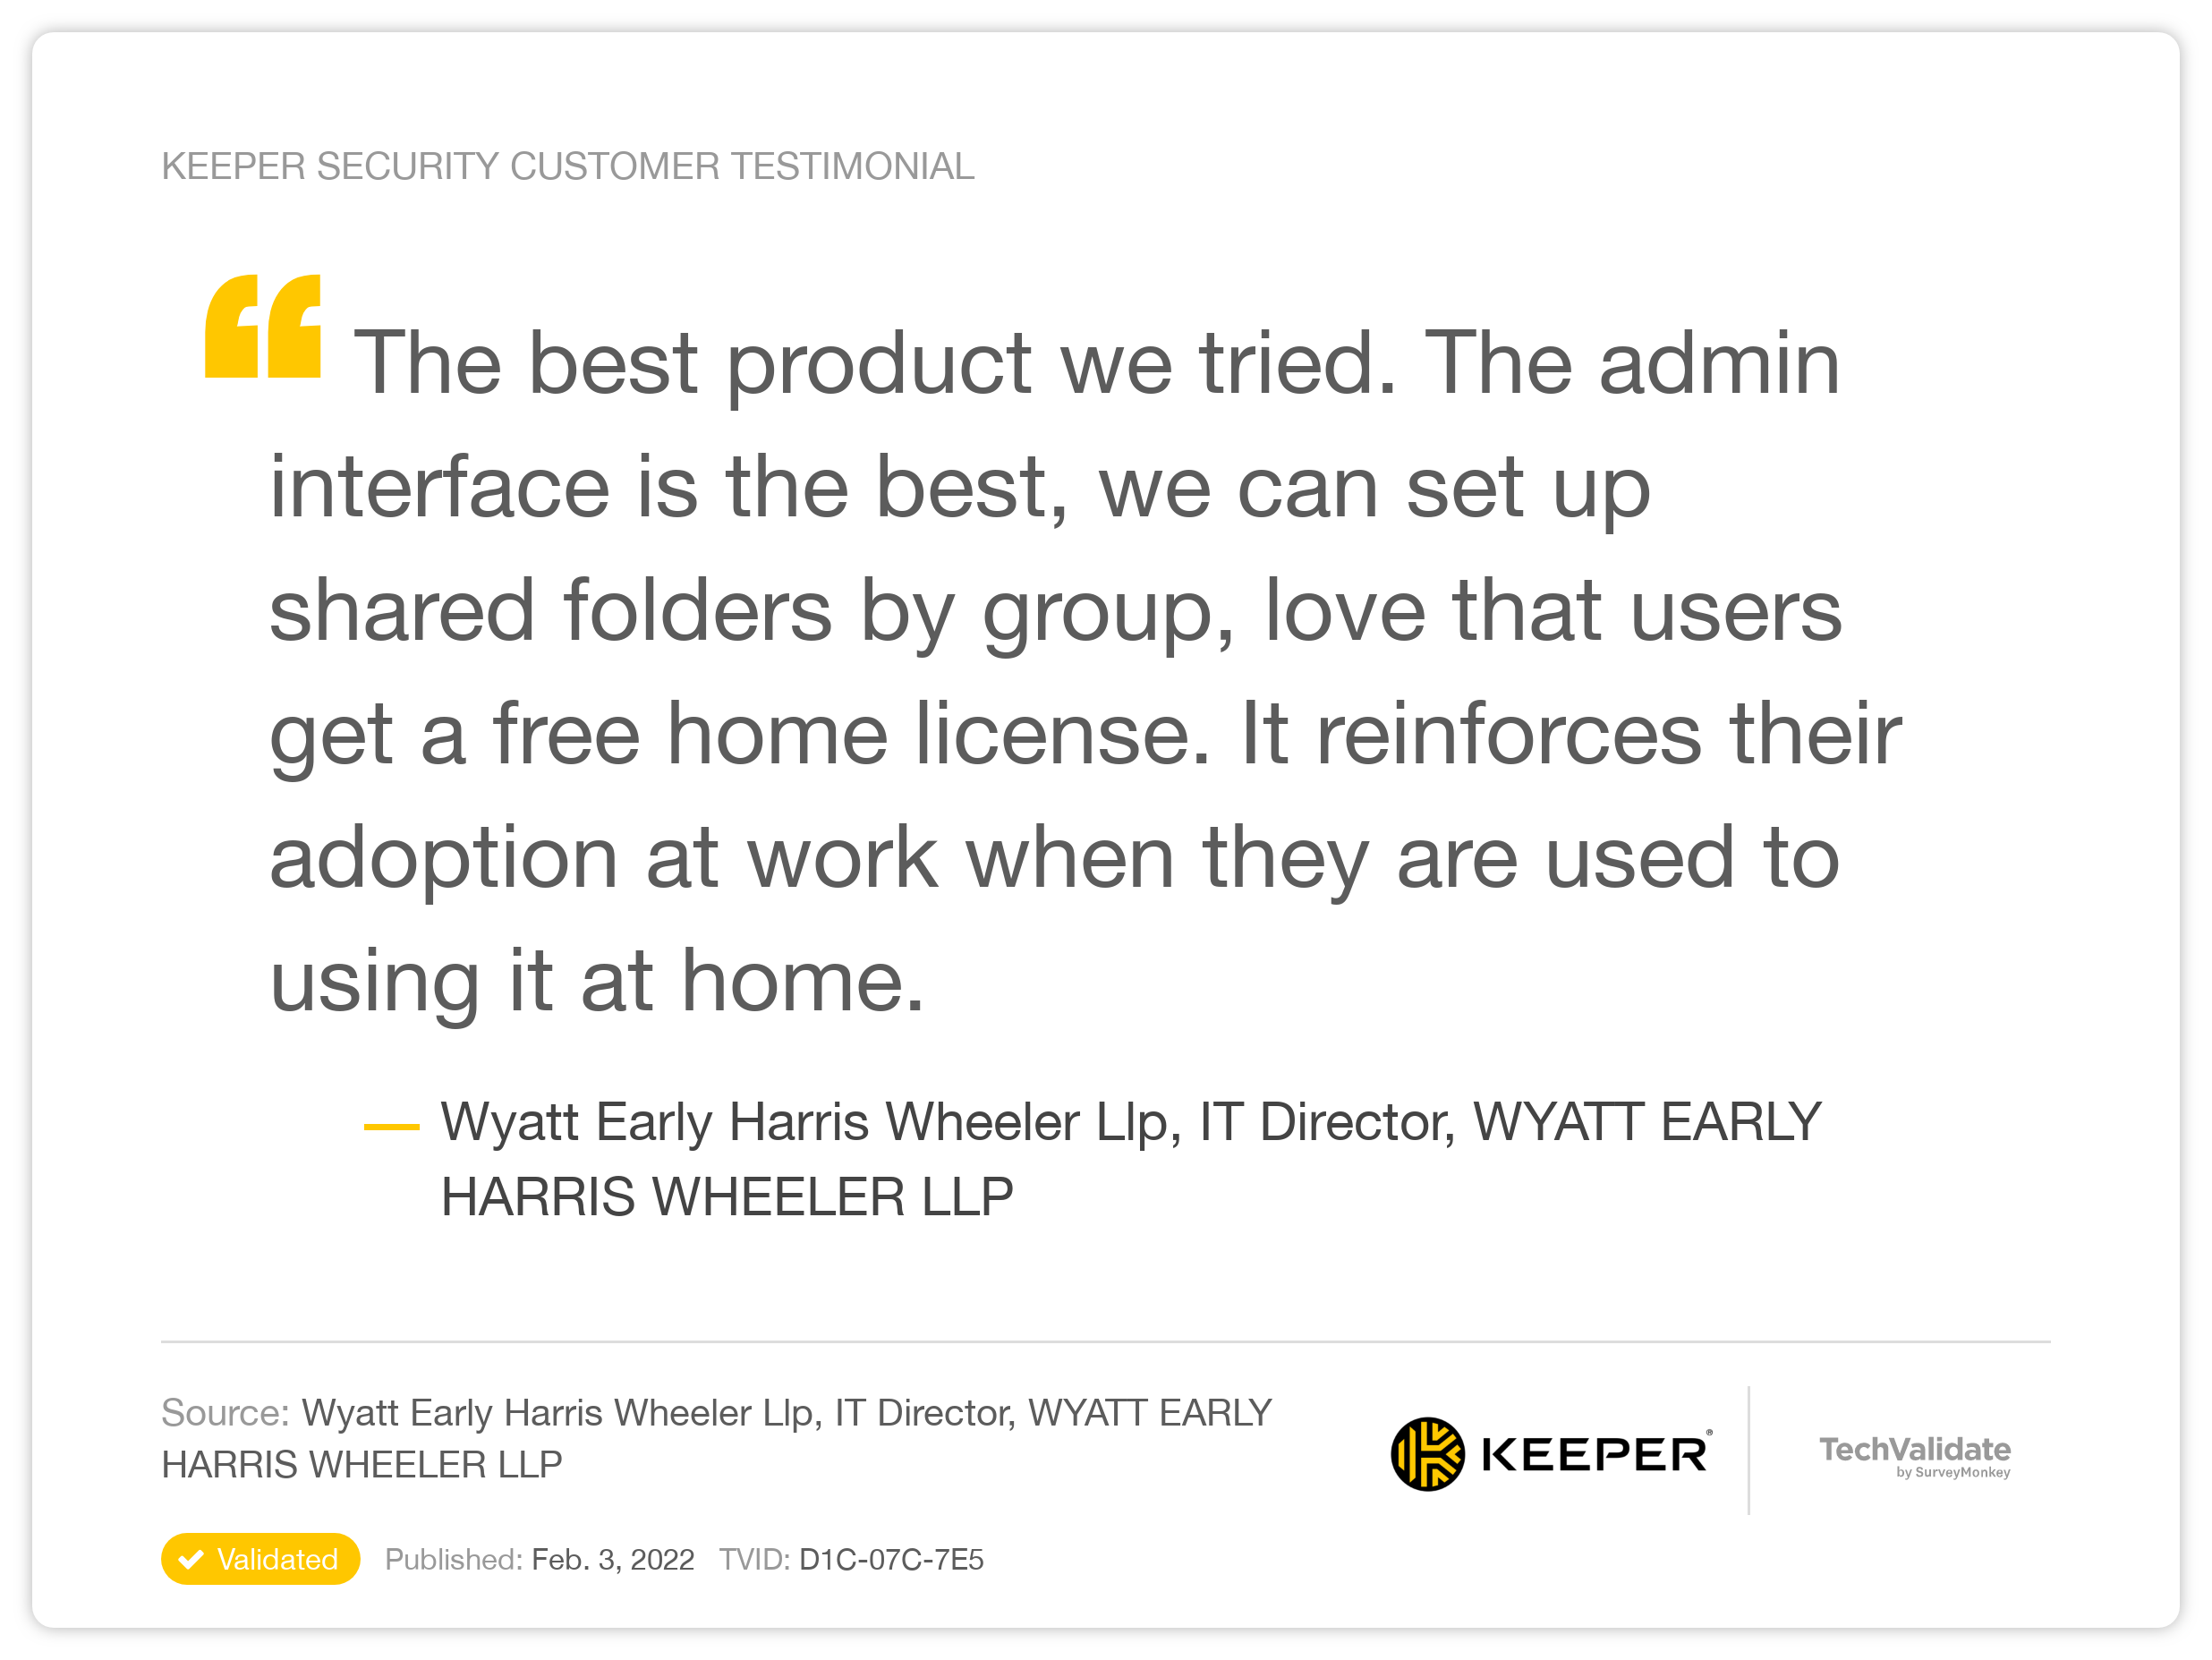 The best product we tried. The admin interface is the best, we can set up shared folders by group, love that users get a free home license. It reinforces their adoption at work when they are used to using it at home.